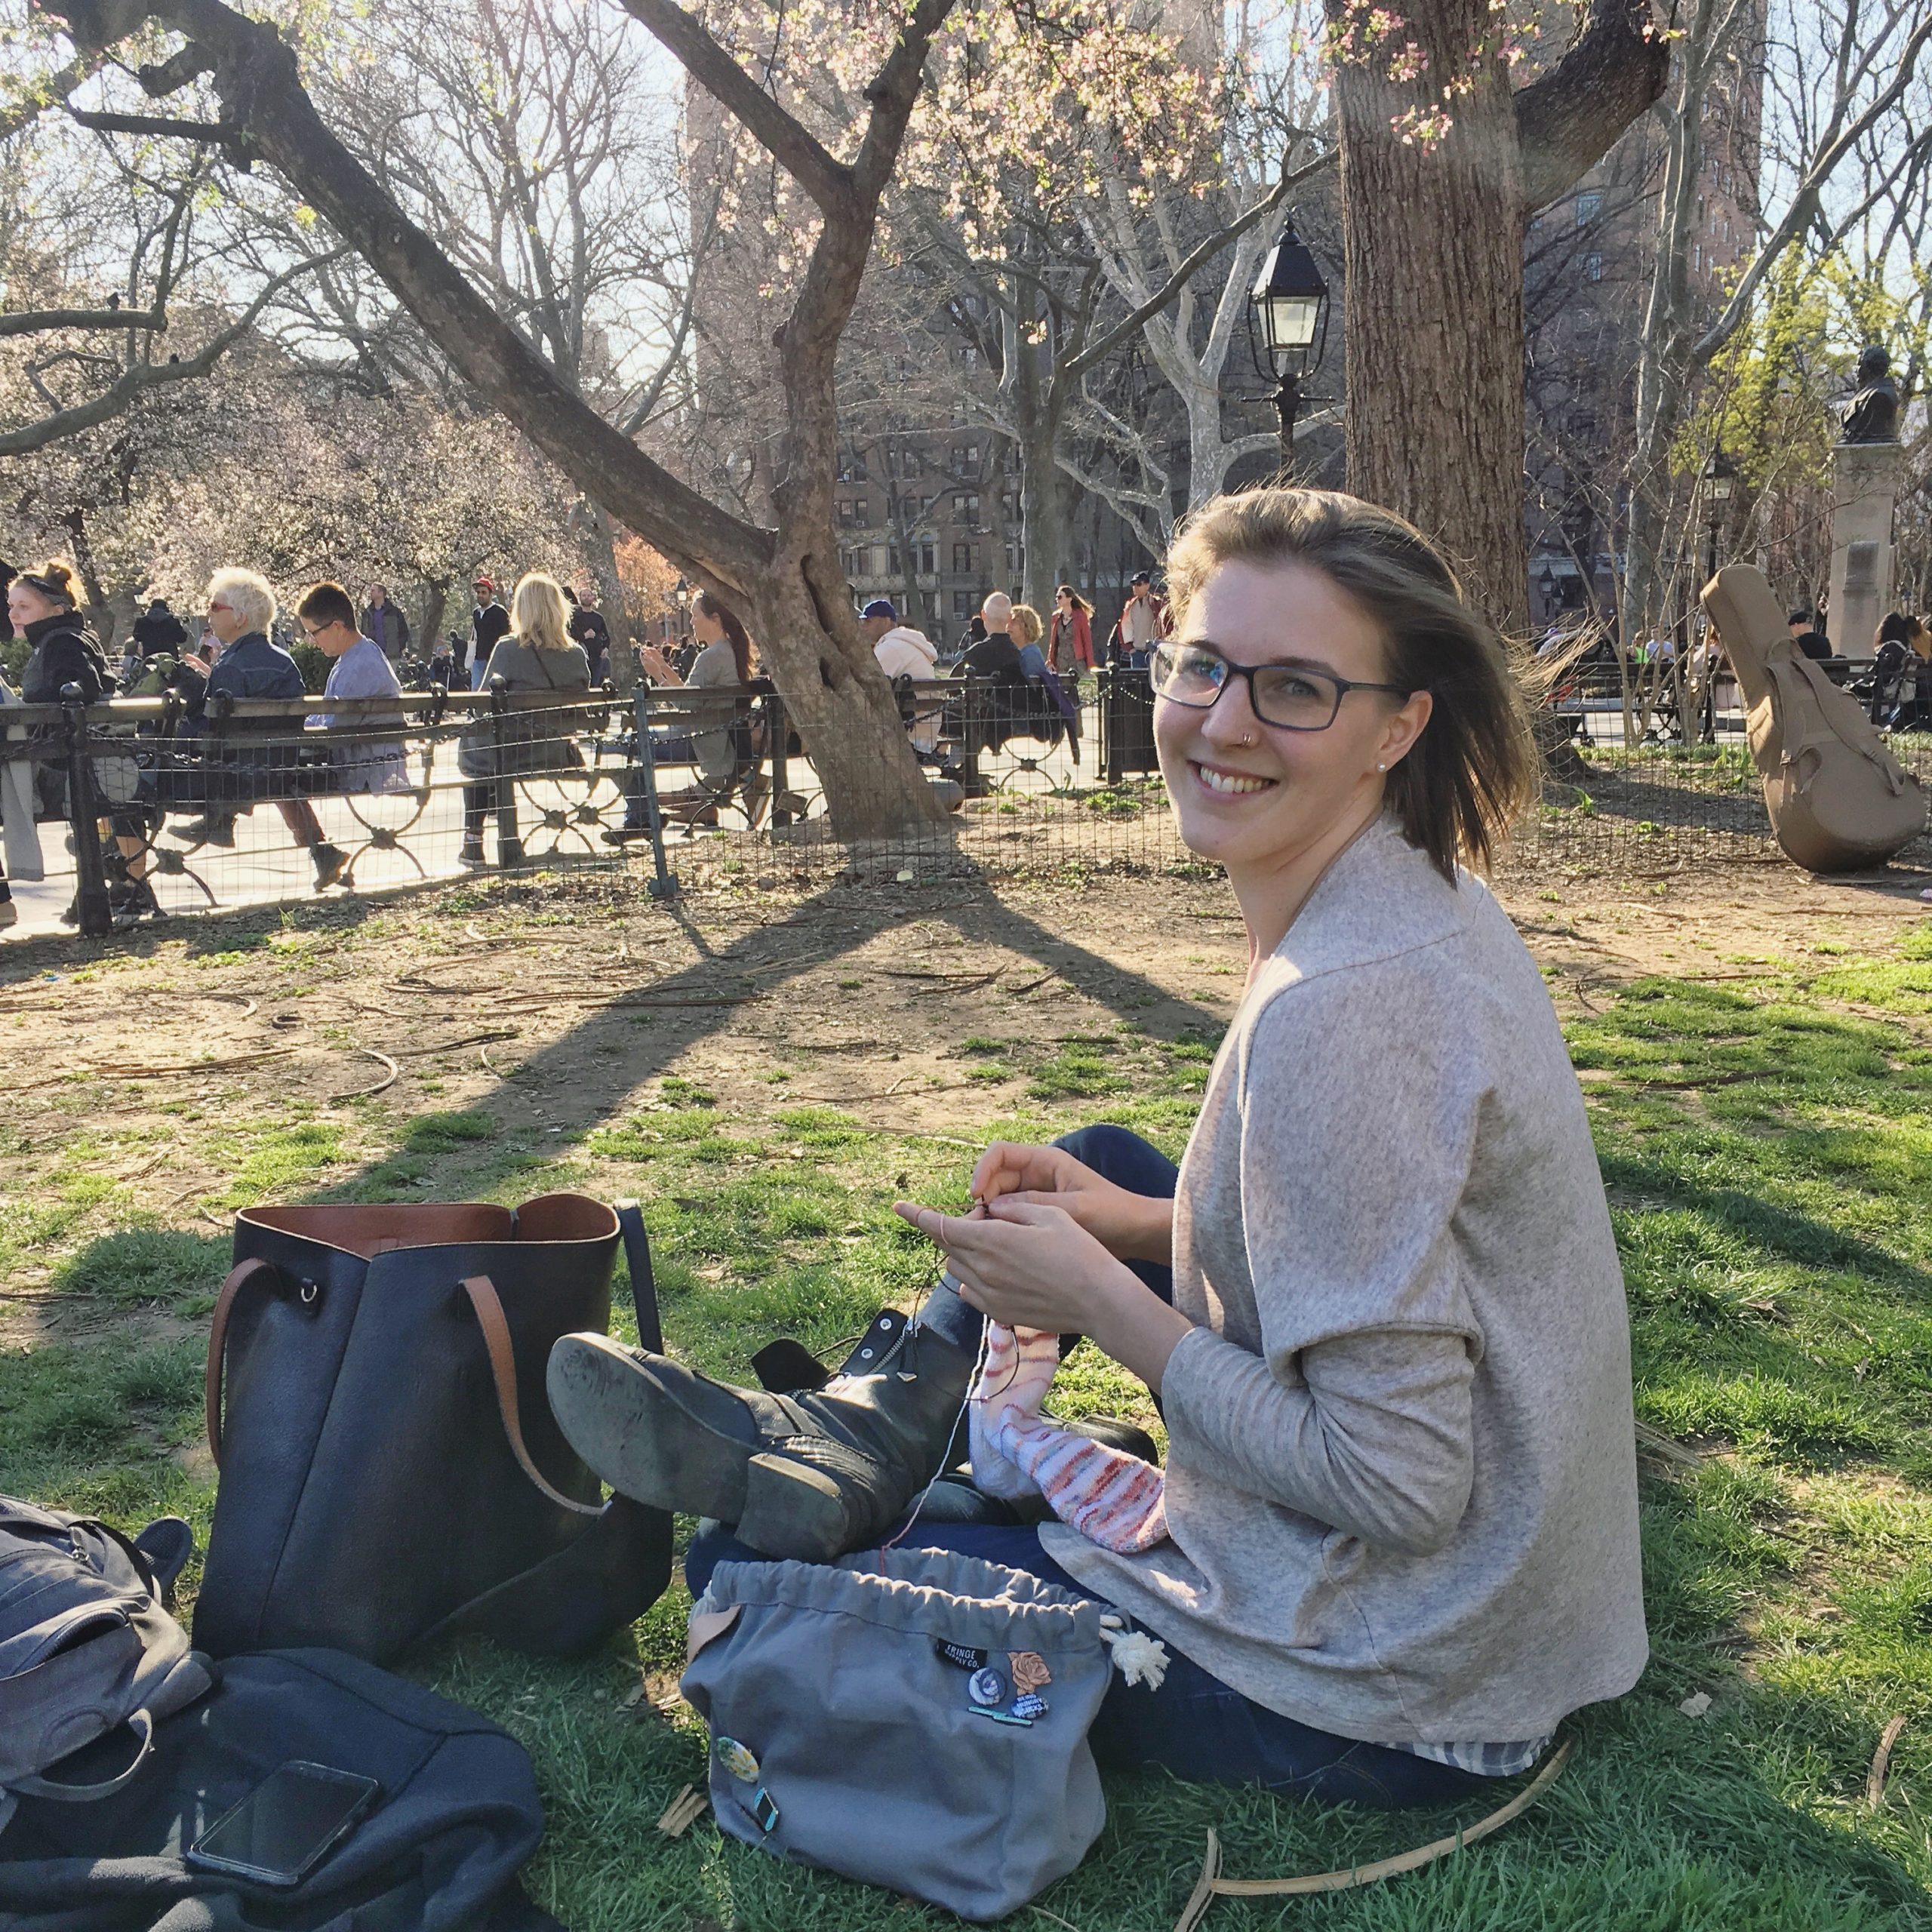 A blonde woman sitting cross-legged in a grassy area of Washington Square Park, knitting a pair of pink socks.